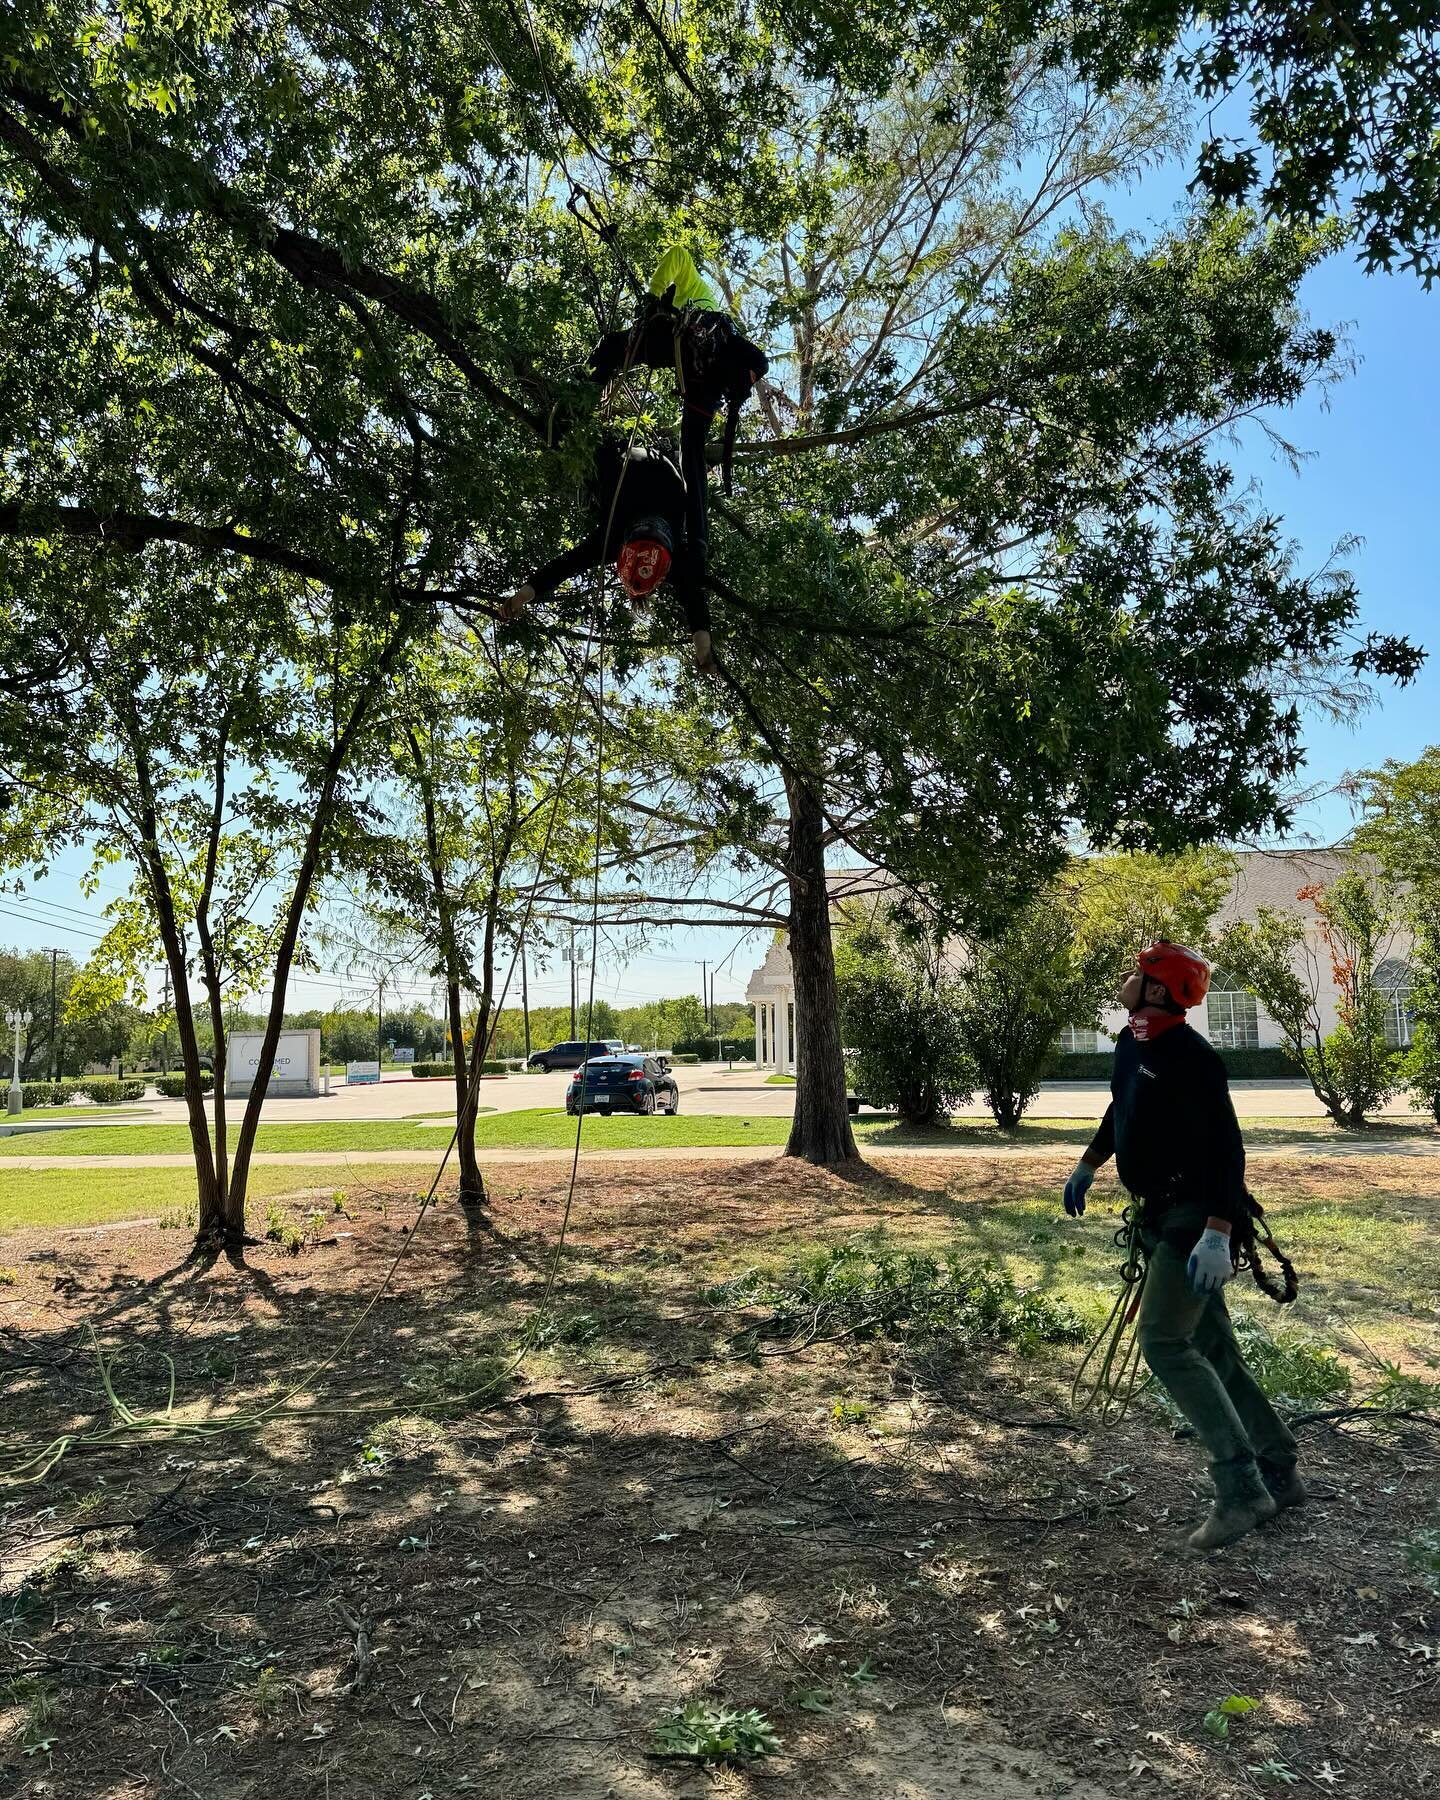 Staying safe doing what we do is essential. This weekend we joined ArbPros for an aerial rescue workshop. Regularly practicing important skills like this is vital!

We also look forward to partnering with ArbPros and @jlmatthewsco for upcoming worksh